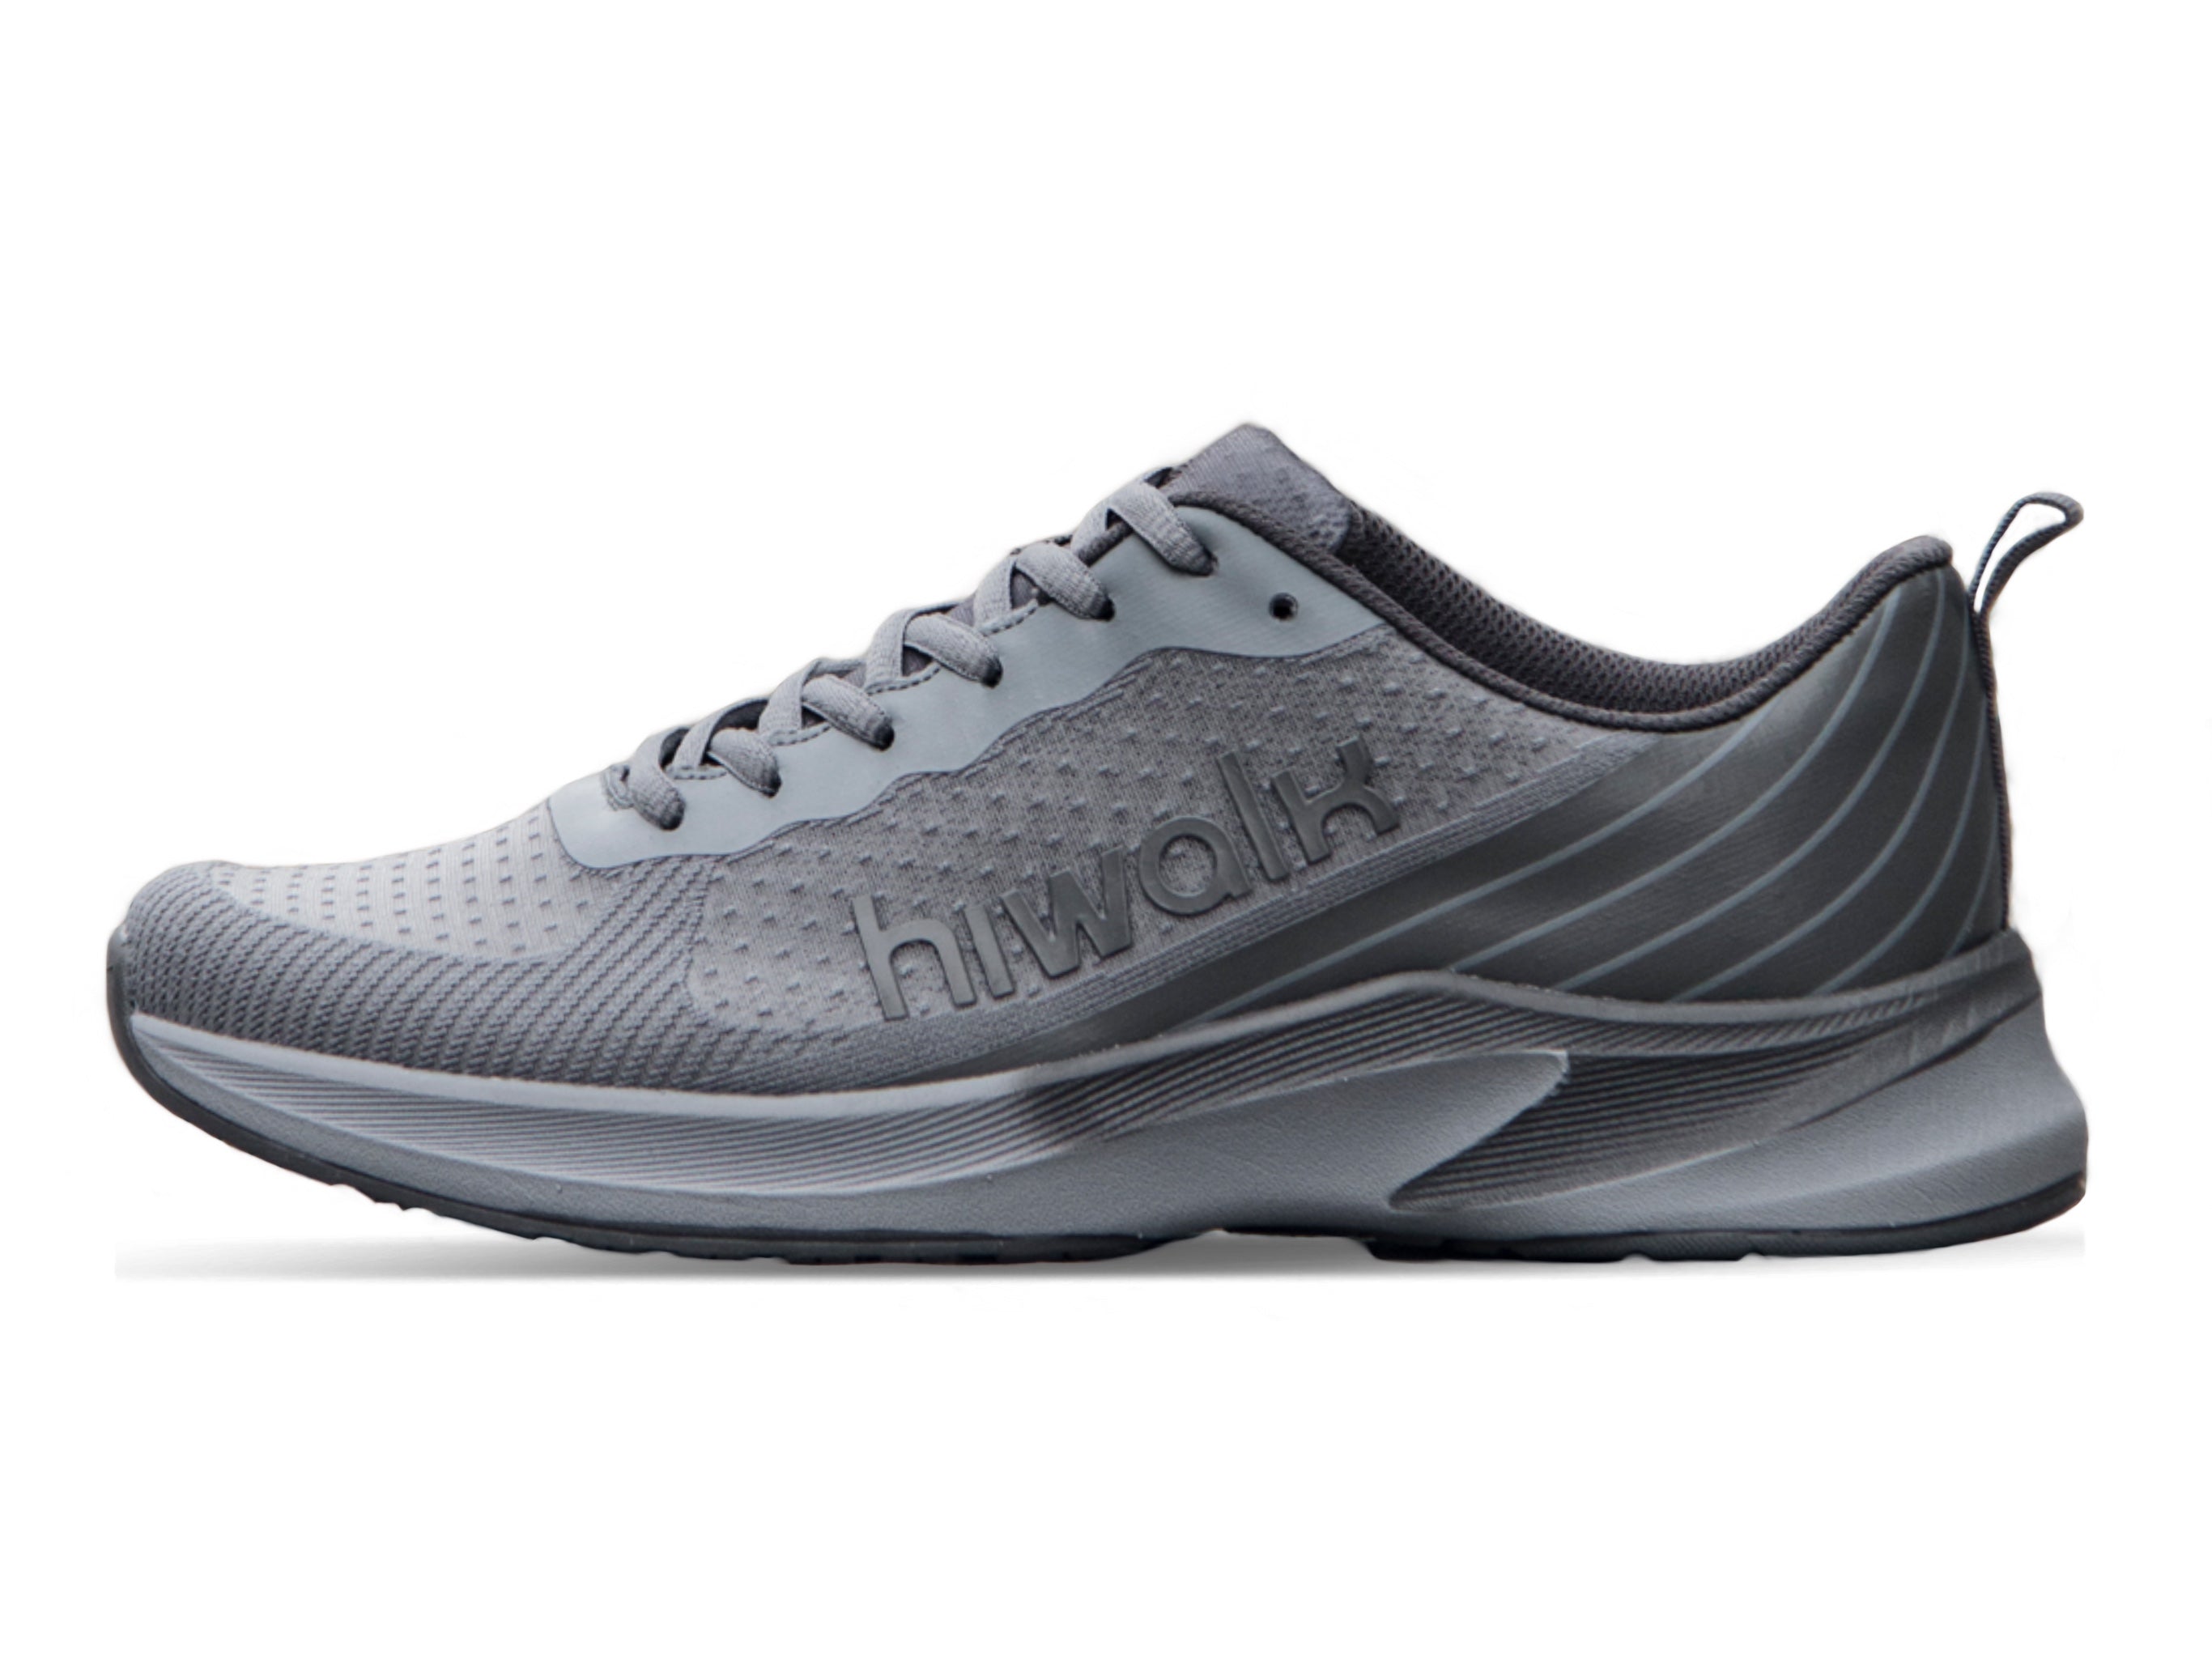 Men's Flywhey Trail Running Shoes